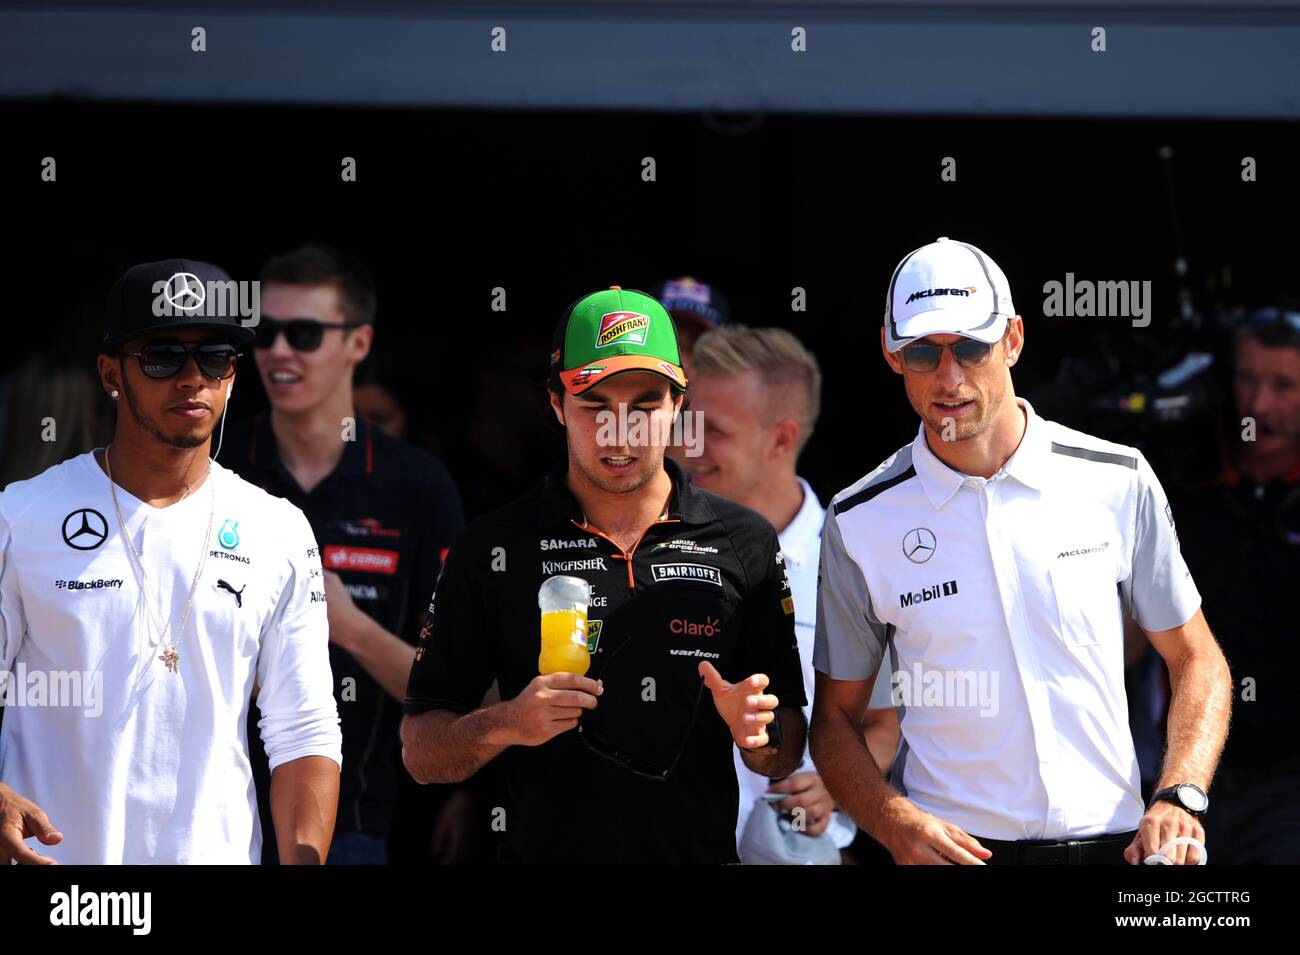 (L to R): Lewis Hamilton (GBR) Mercedes AMG F1 with Sergio Perez (MEX) Sahara Force India F1 and Jenson Button (GBR) McLaren on the drivers parade. Italian Grand Prix, Sunday 7th September 2014. Monza Italy. Stock Photo